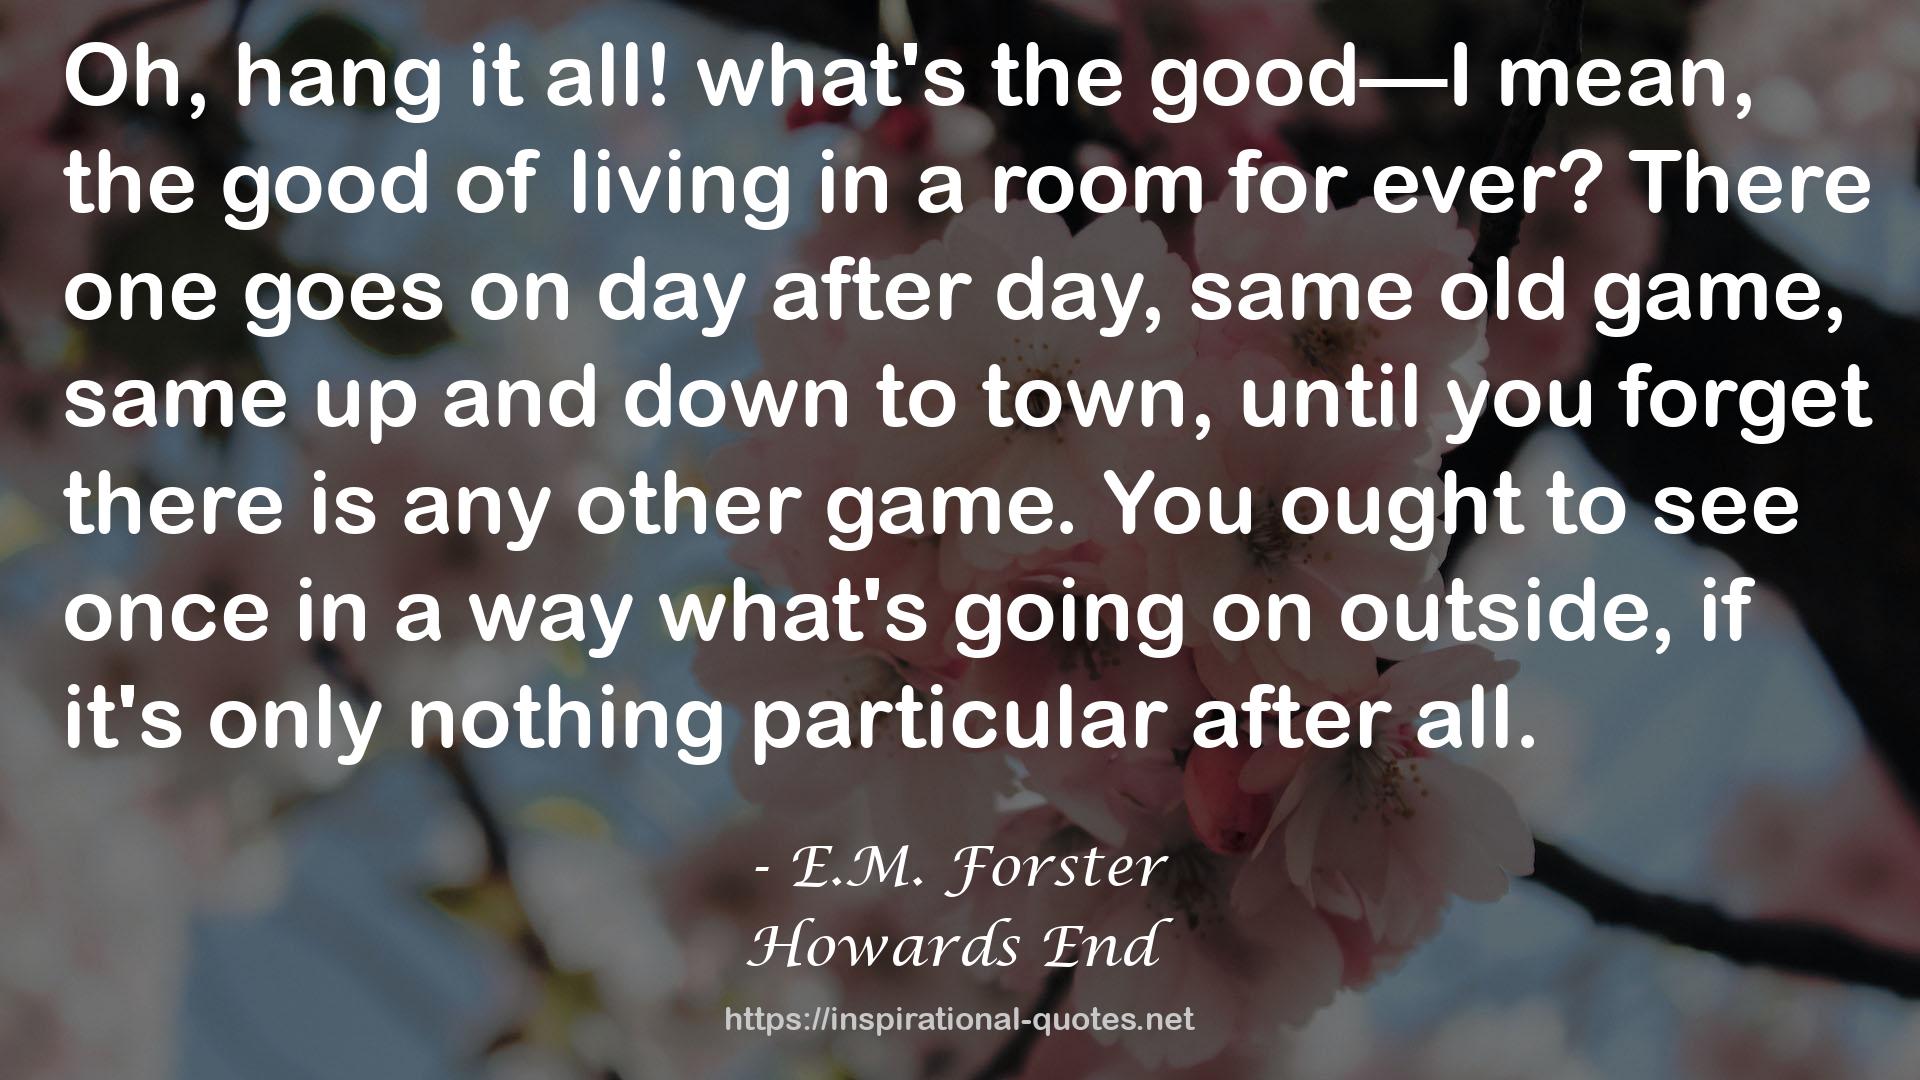 Howards End QUOTES